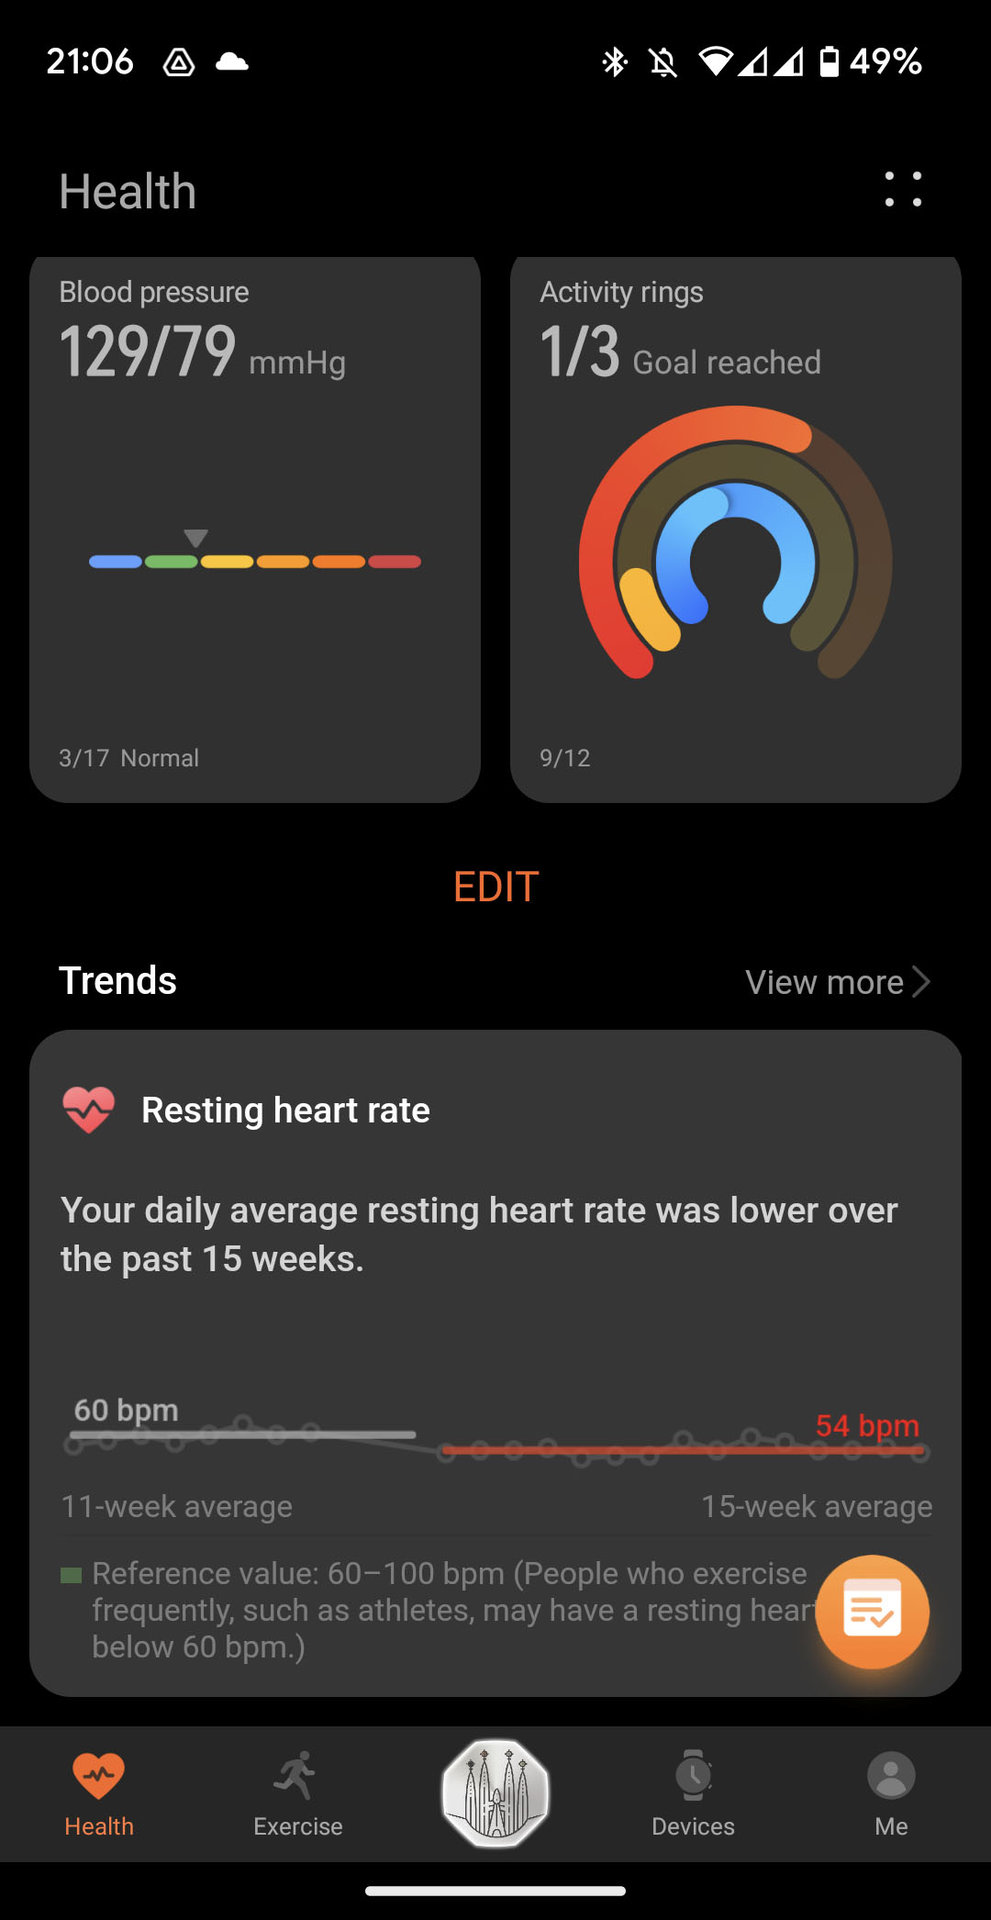 Huawi Health dashboard showing heart rate trends